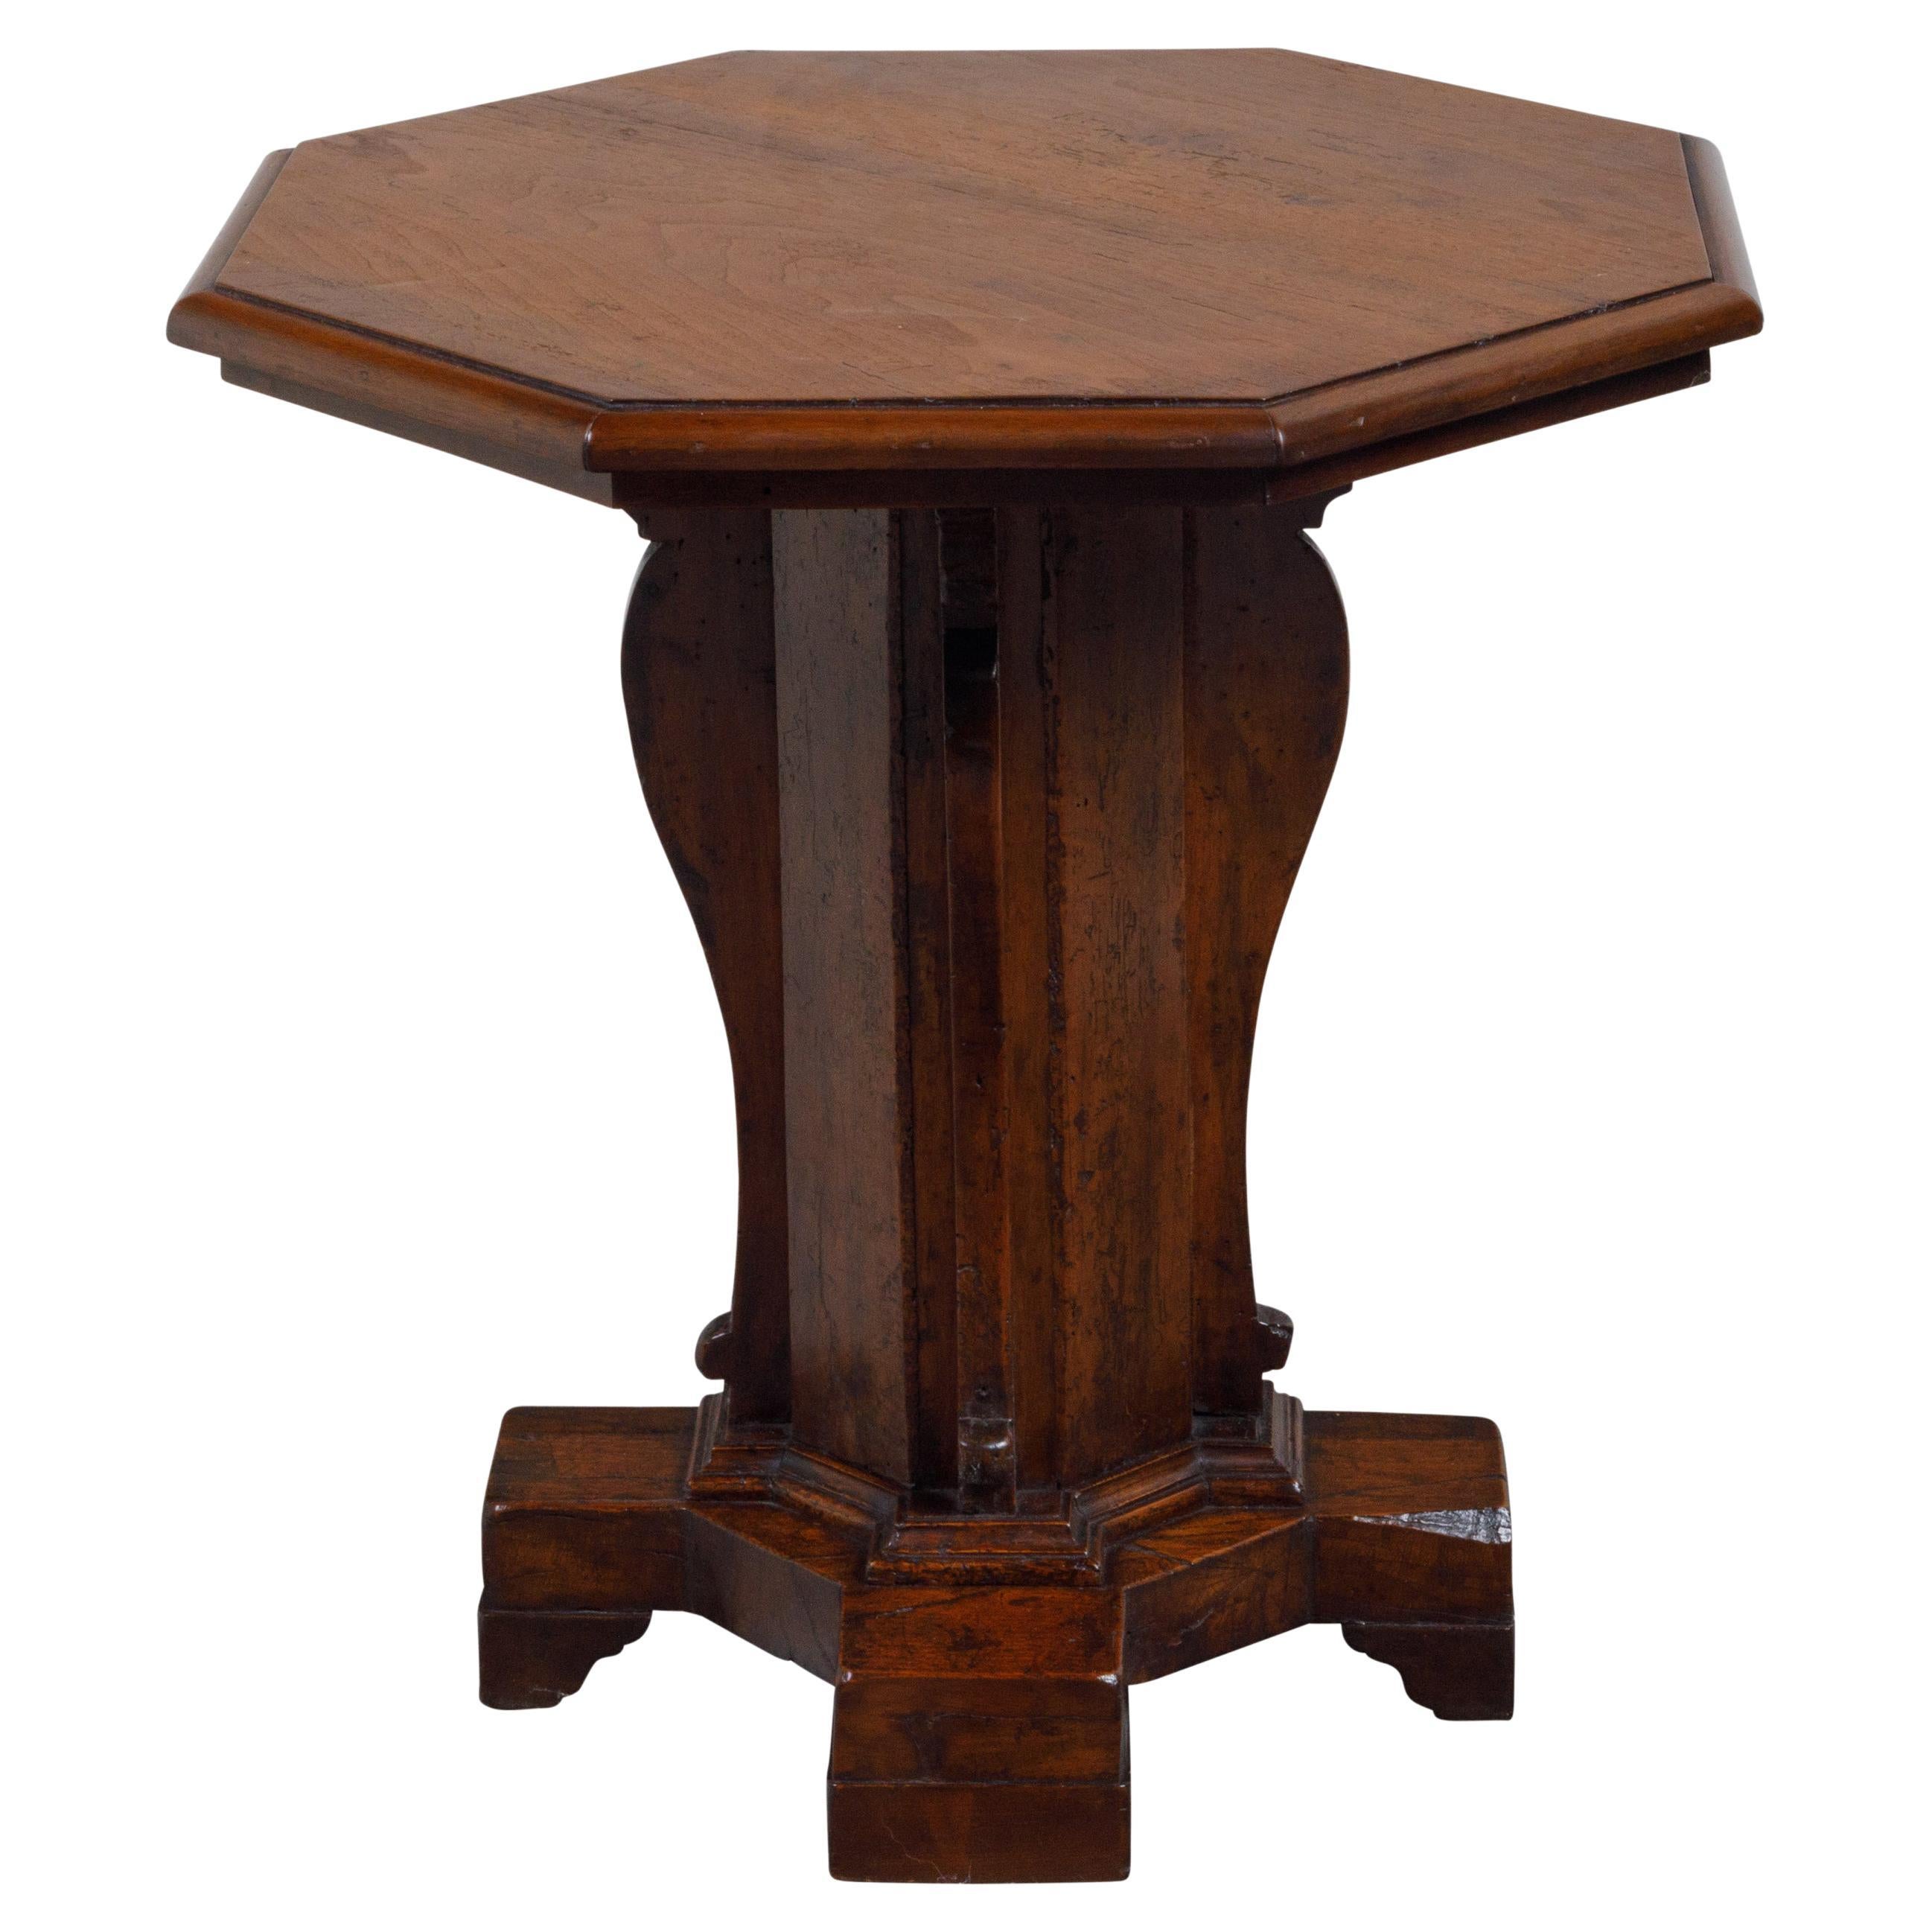 Italian 19th Century Walnut Side Table with Octagonal Top and Pedestal Base For Sale